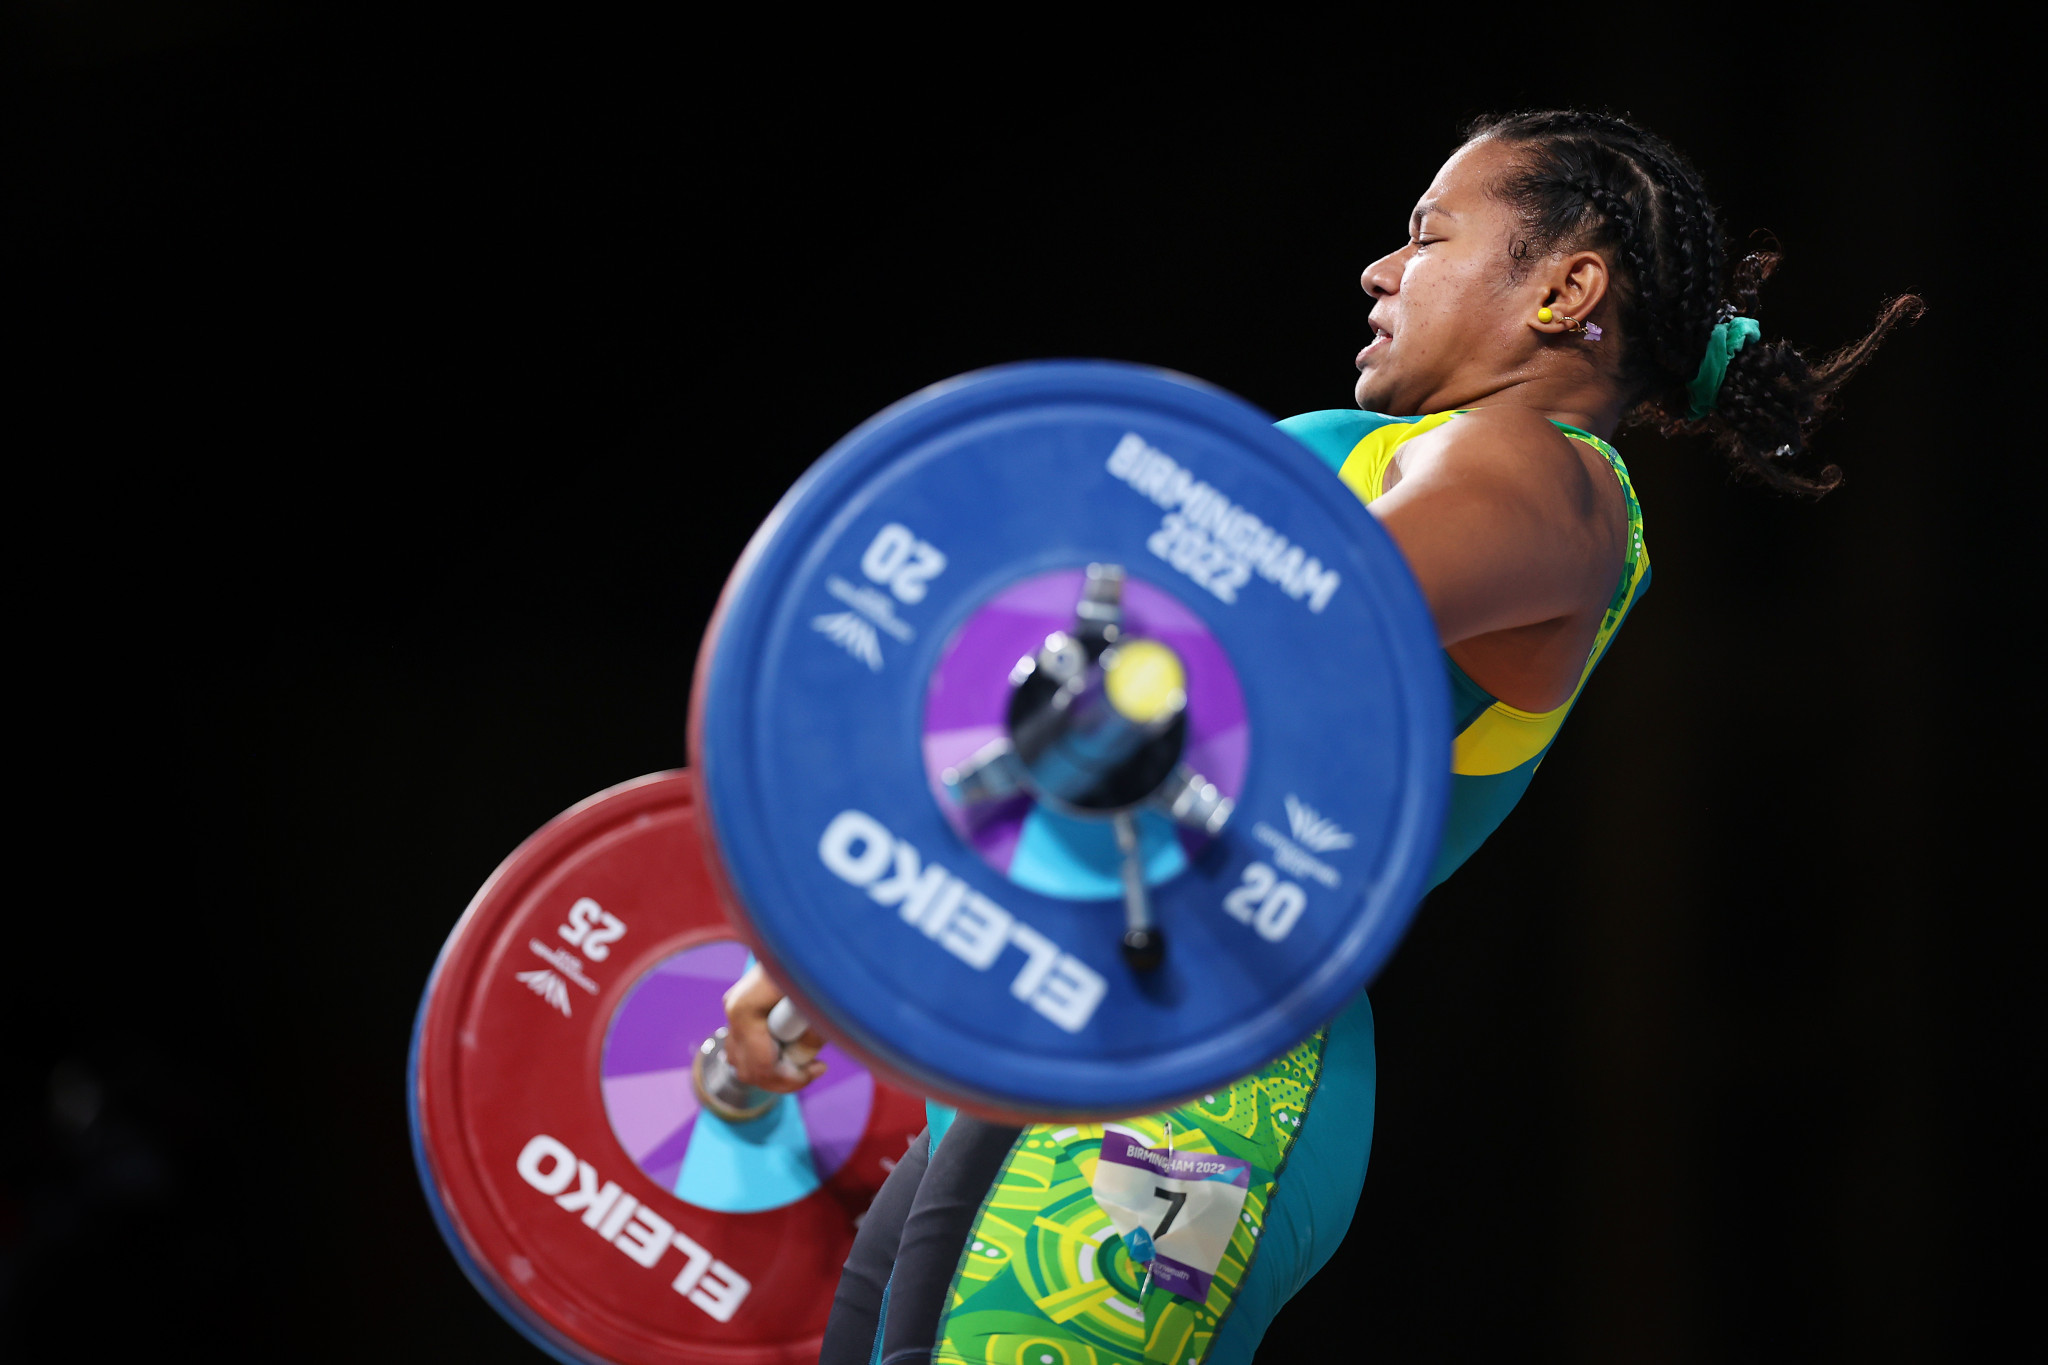 Weightlifter Eileen Cikamatana was one of three gold medallists from Birmingham 2022 that were among the athletes from Victoria to receive the Australian Sports Medal ©Getty Images